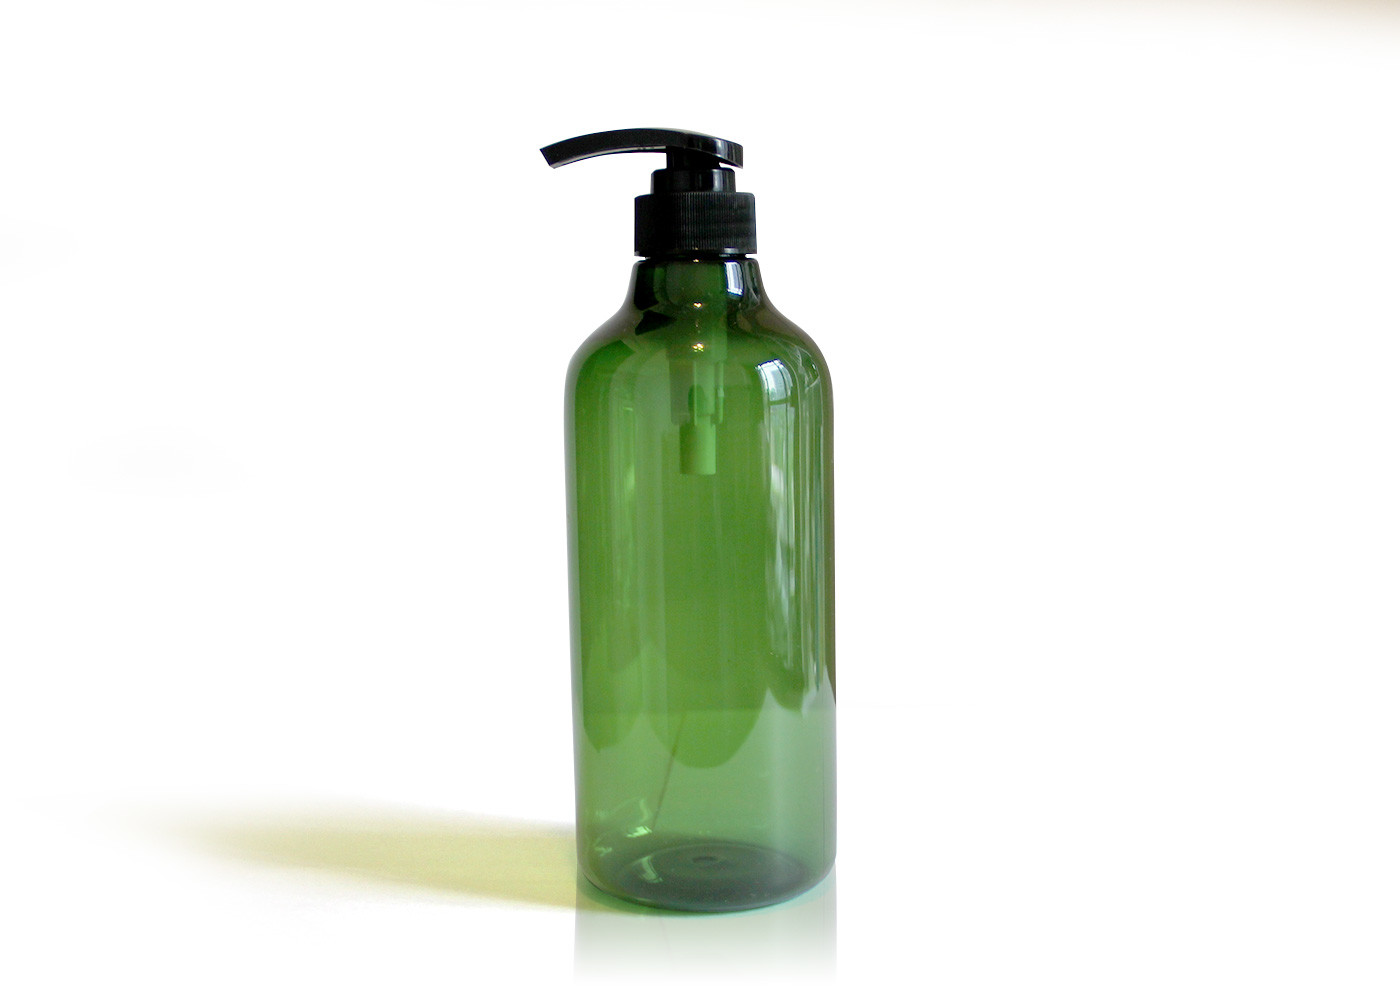  500ml Translucent Green Lotion Bottle / Round Cosmetic Bottles With Sleek Neck Manufactures